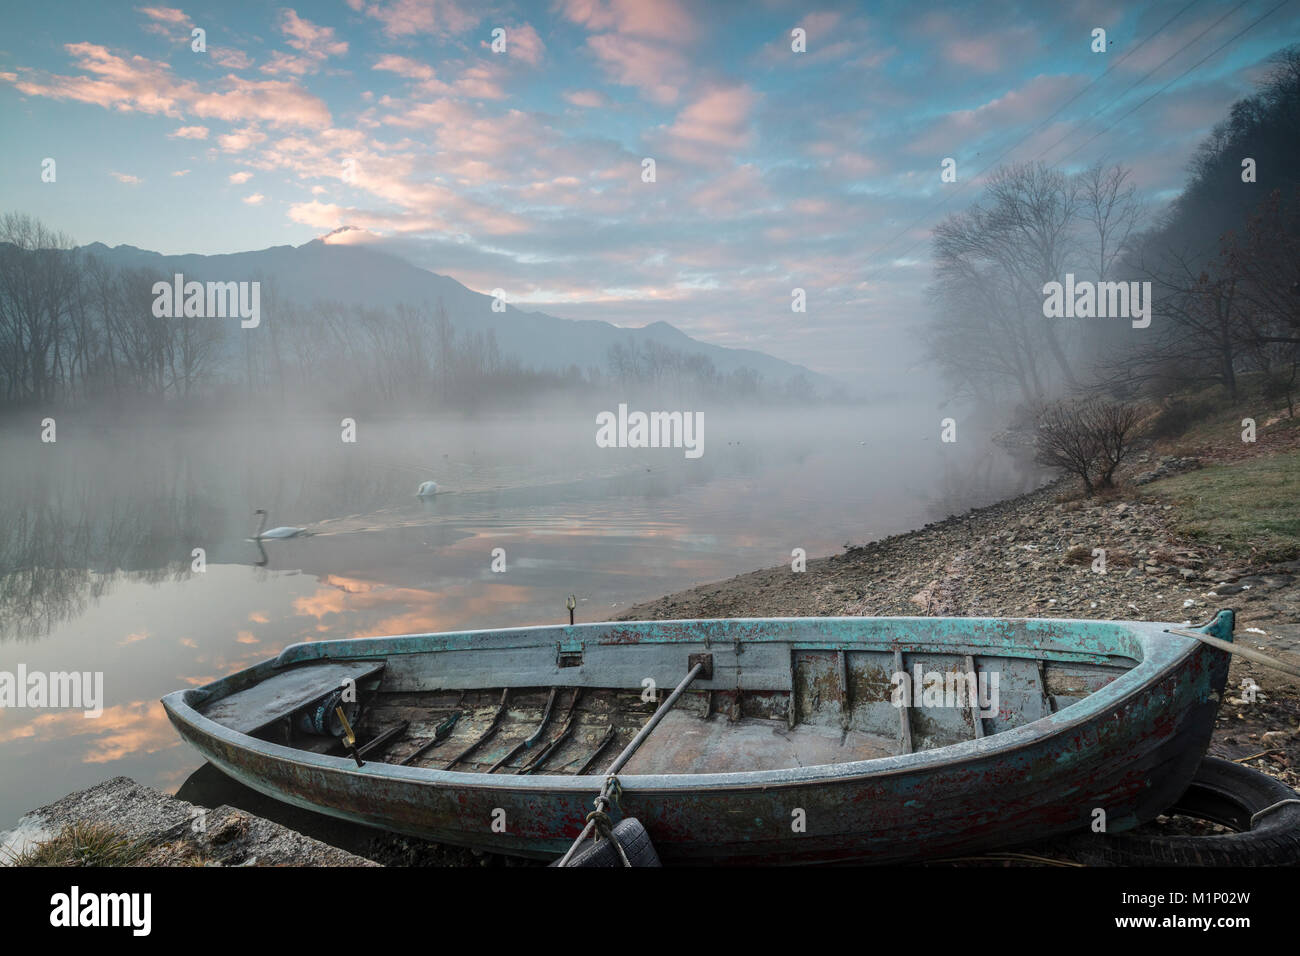 Wood boat on the shore of River Mera at sunrise, Sorico, Como province, Lower Valtellina, Lombardy, Italy, Europe Stock Photo